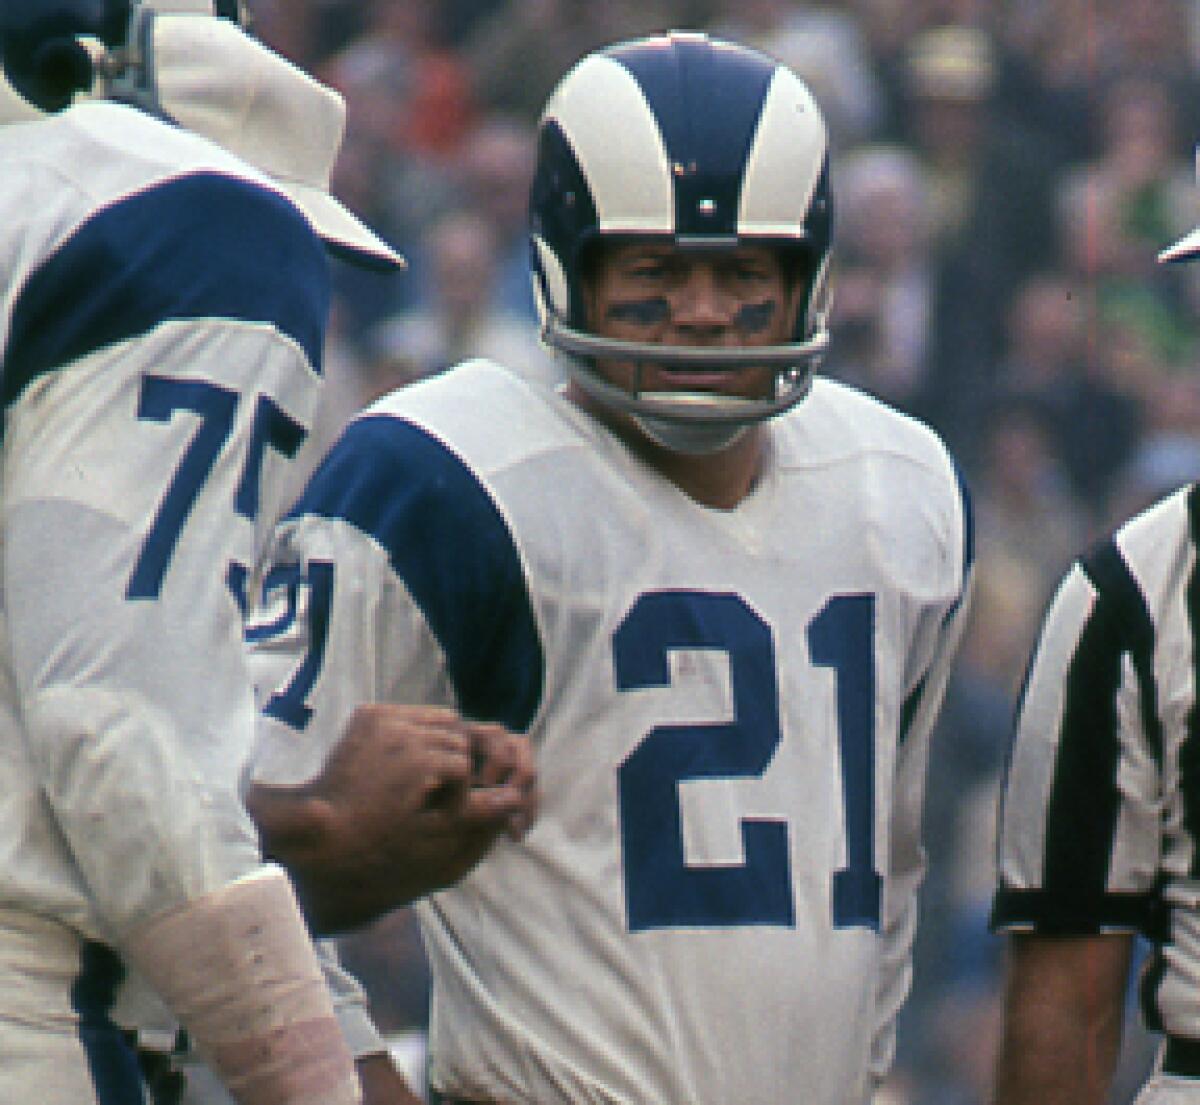 Rams safety Eddie Meador stands on the field during a game in the 1960s.